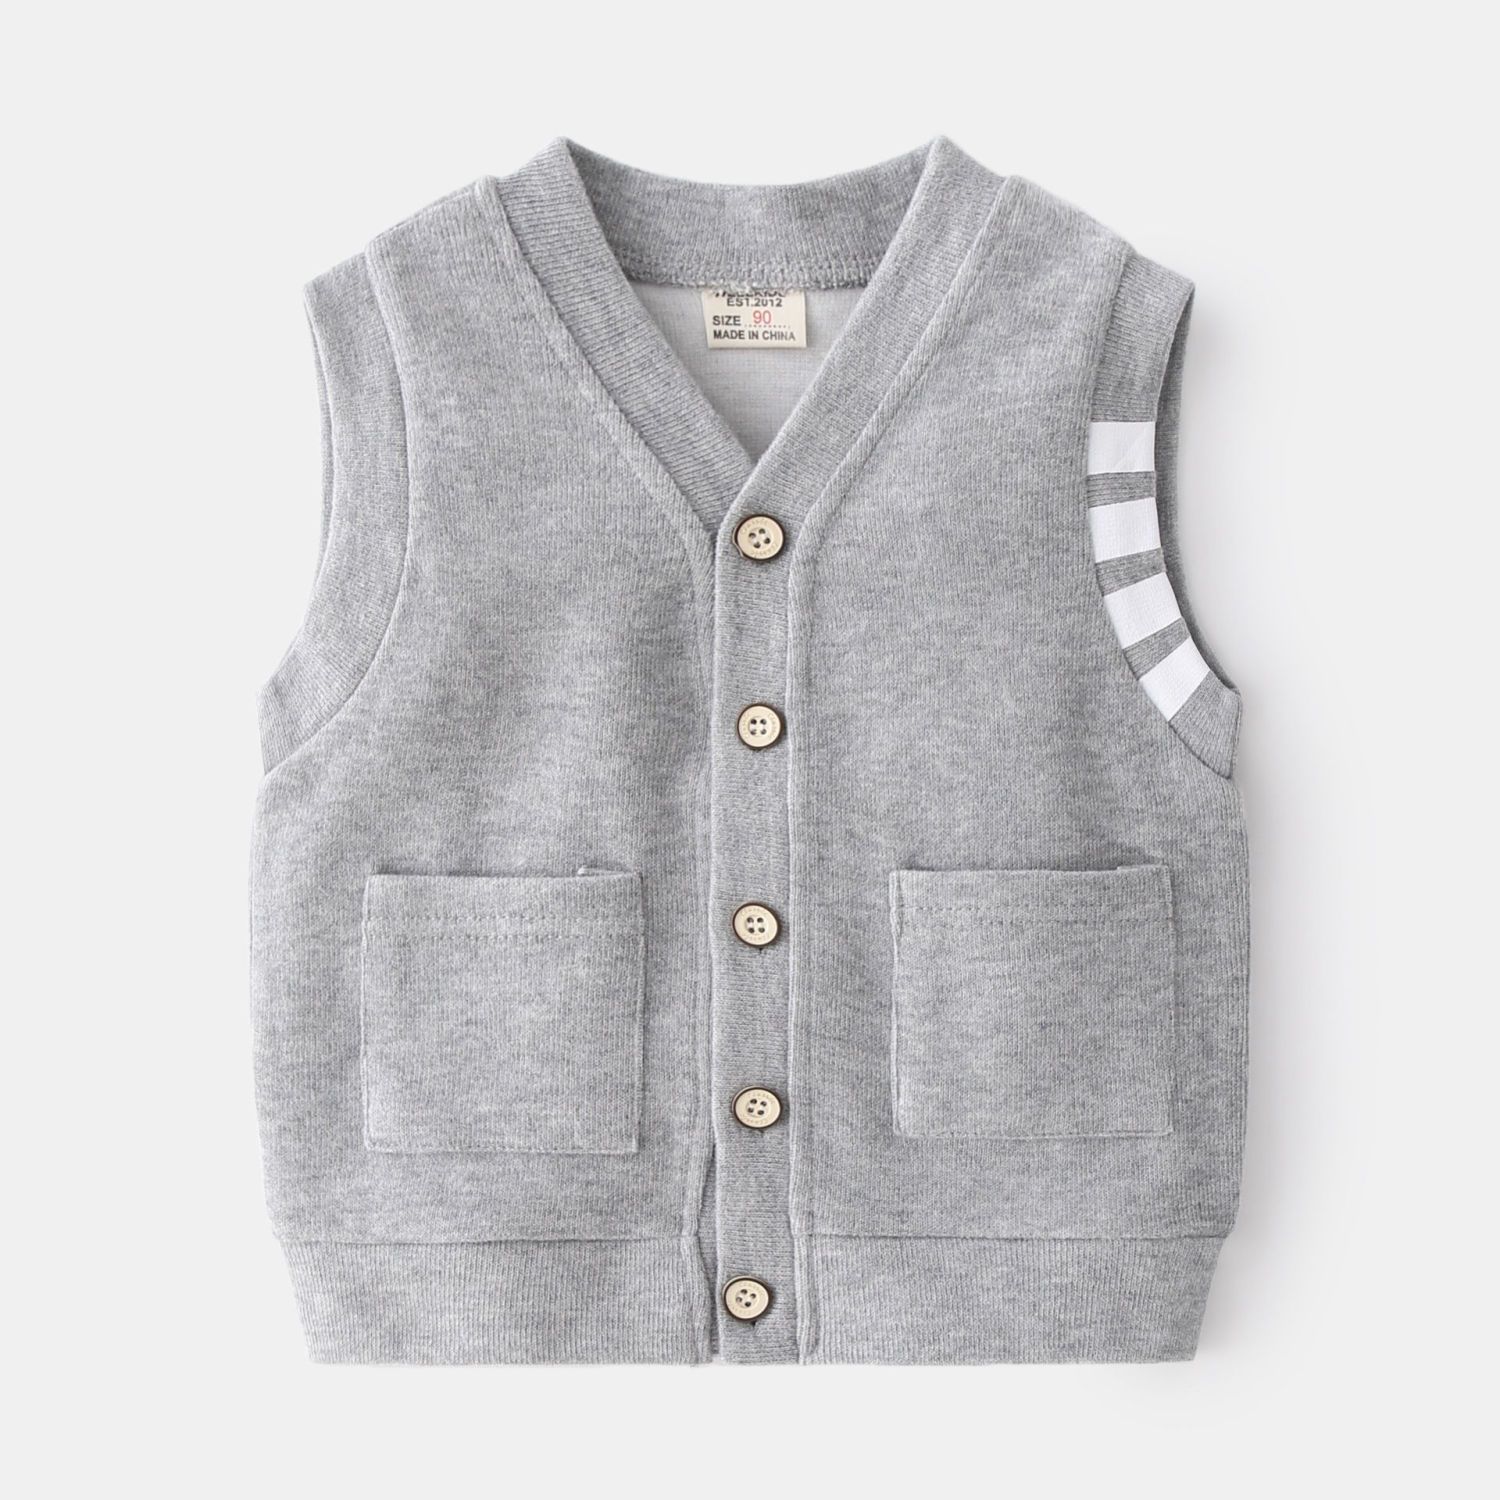 Children's vest male spring and autumn thin section 2023 baby vest solid color casual boy's vest vest outer wear all-match